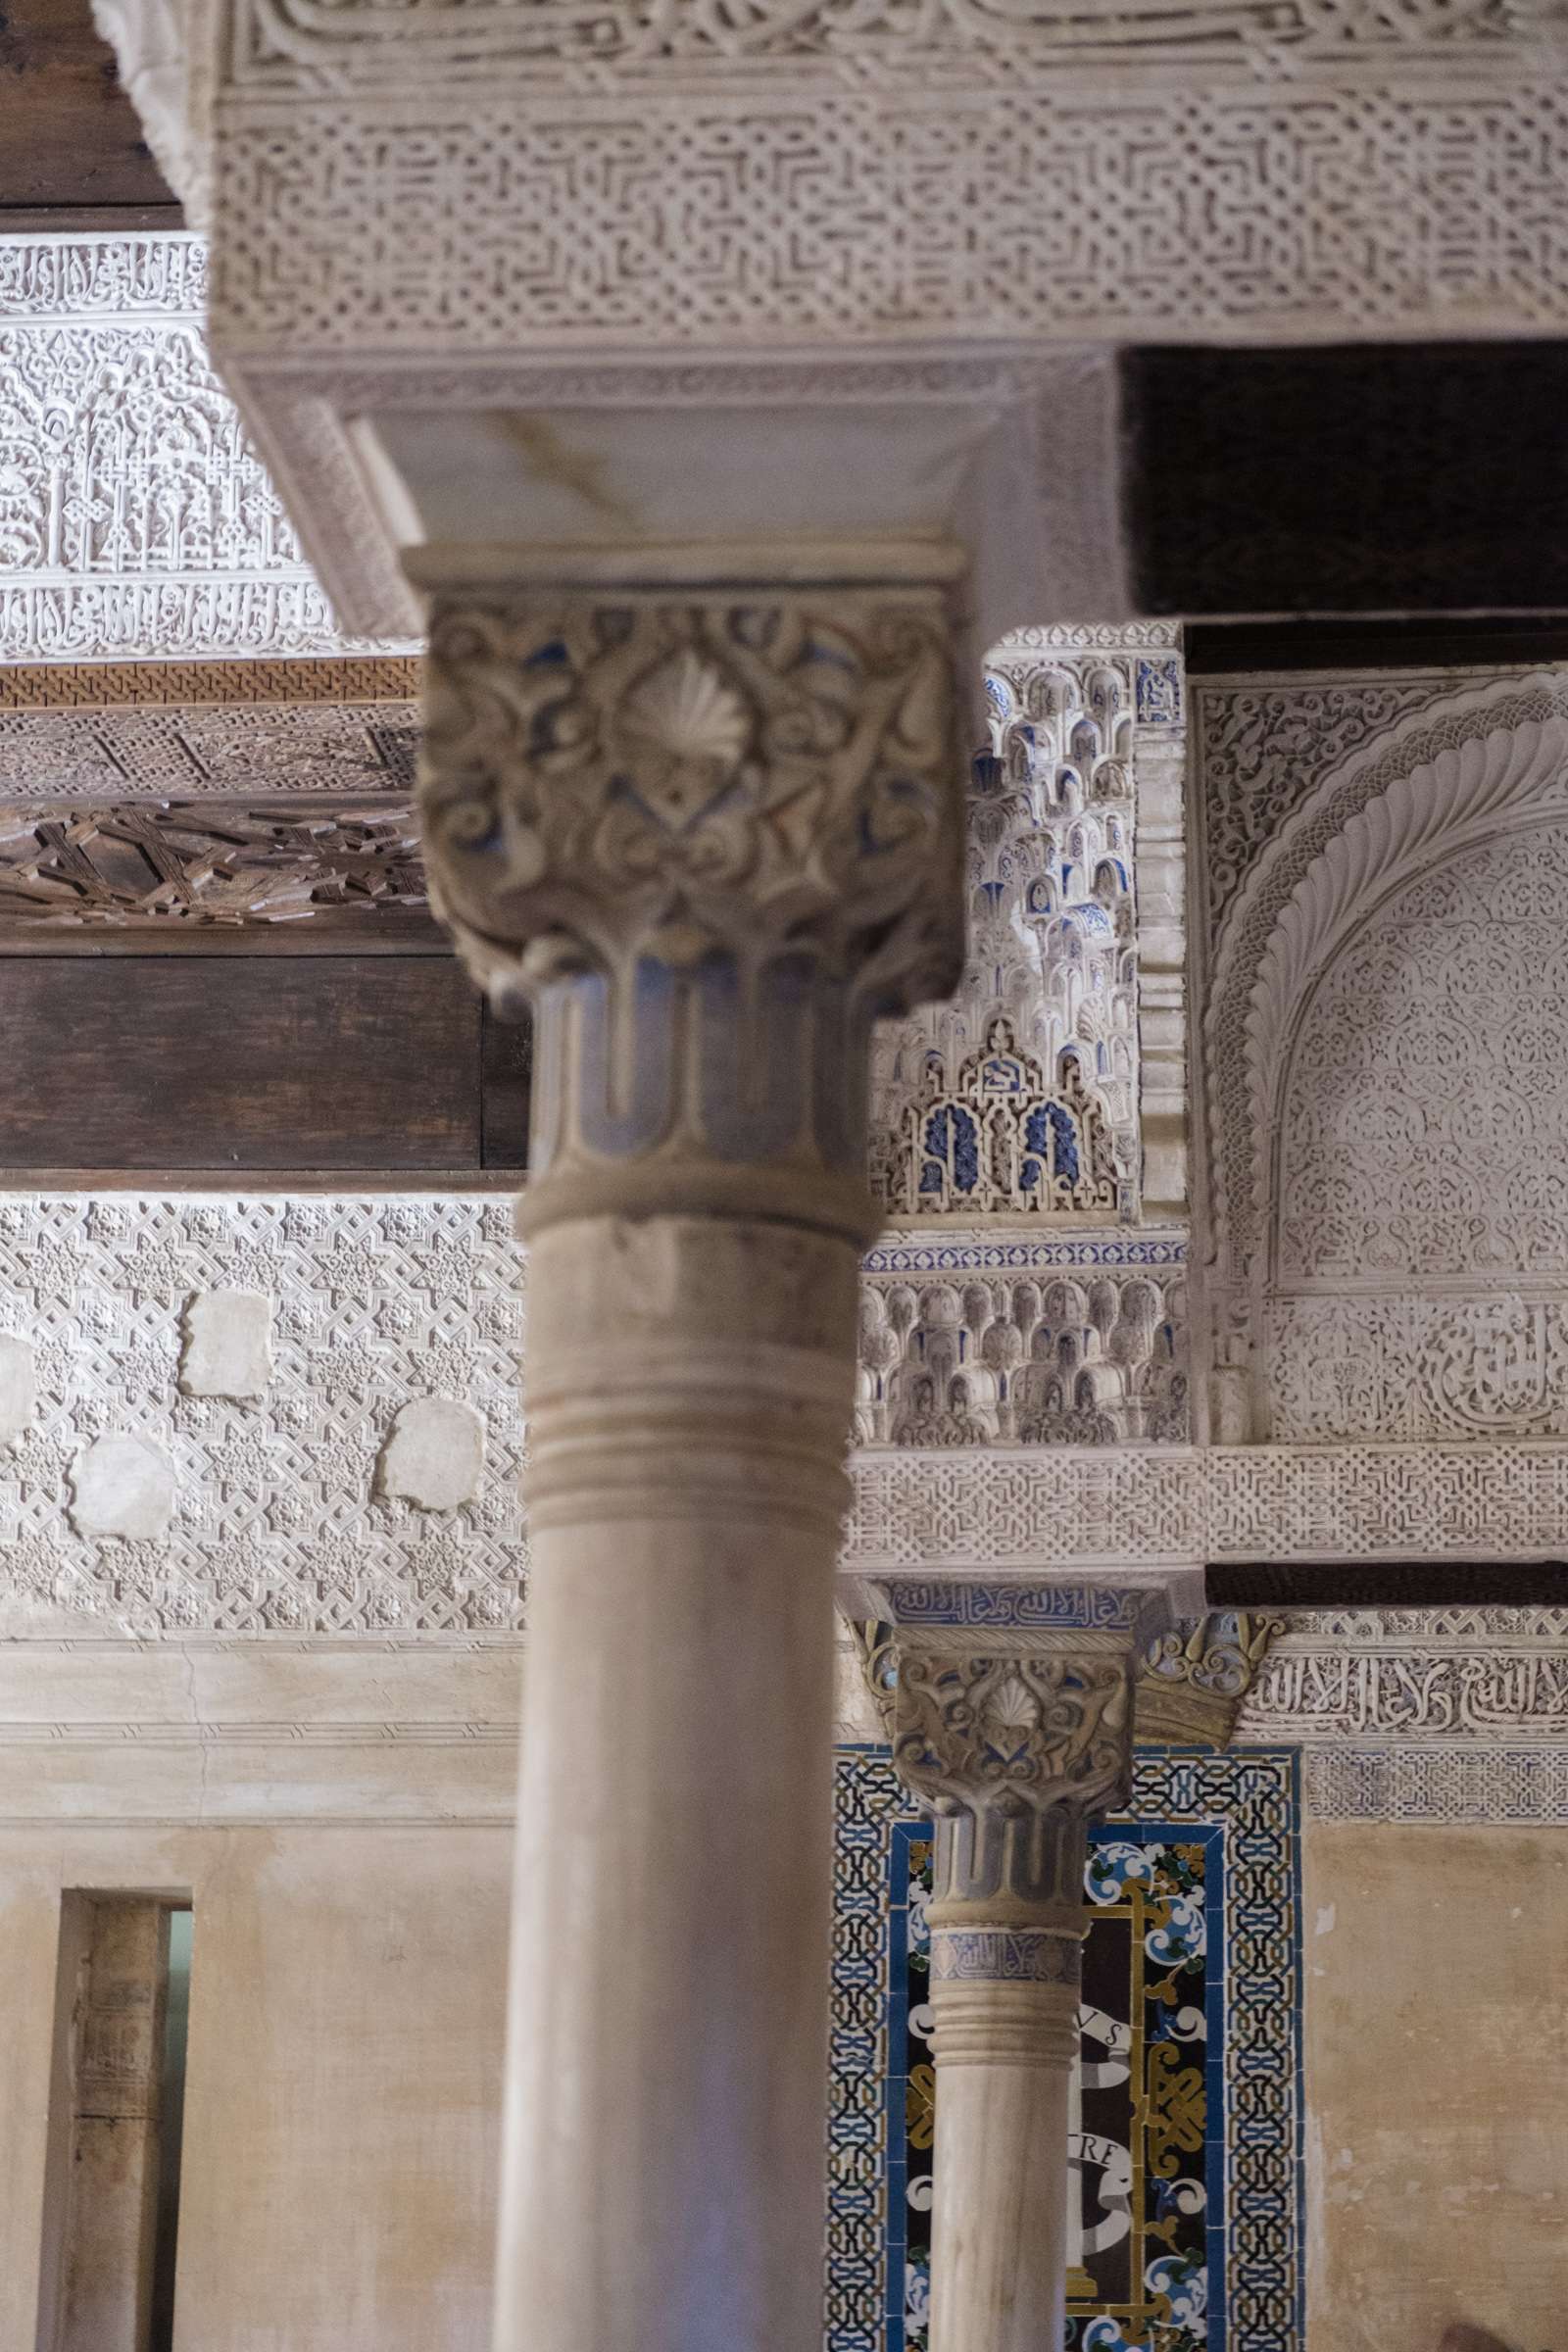 Old columns and arches, The Alhambra, Granada